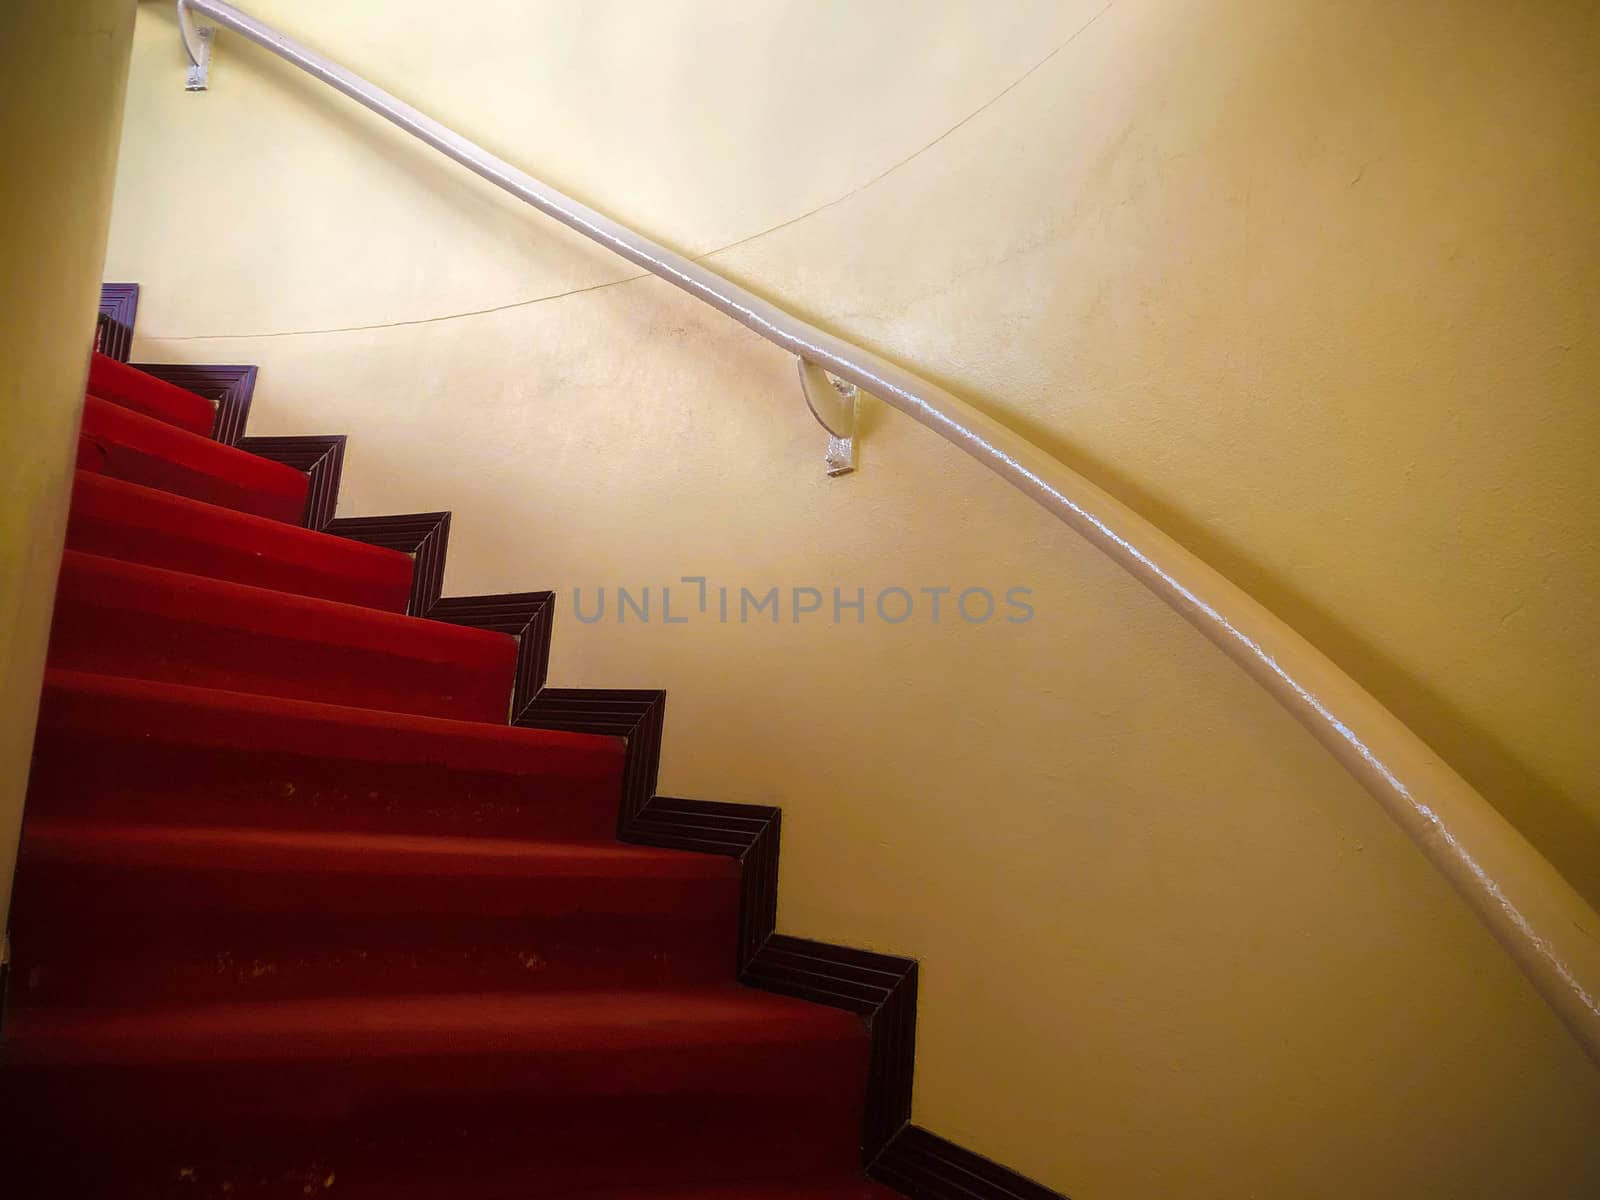 Red carpet on the White stairs in a interior